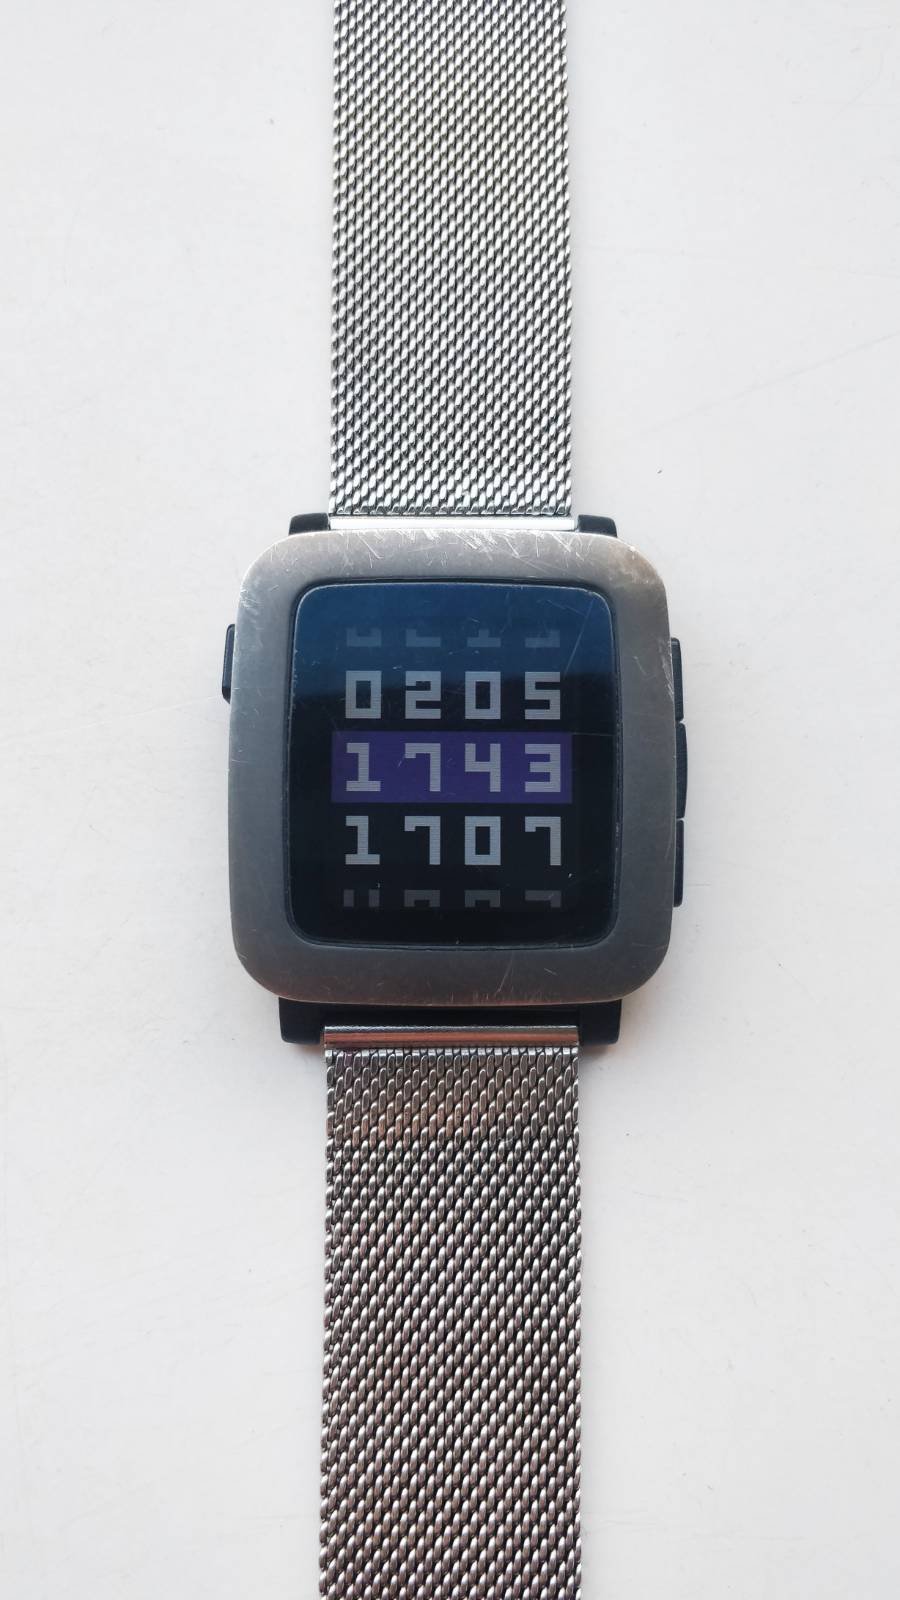 Pebble time with metal watch band